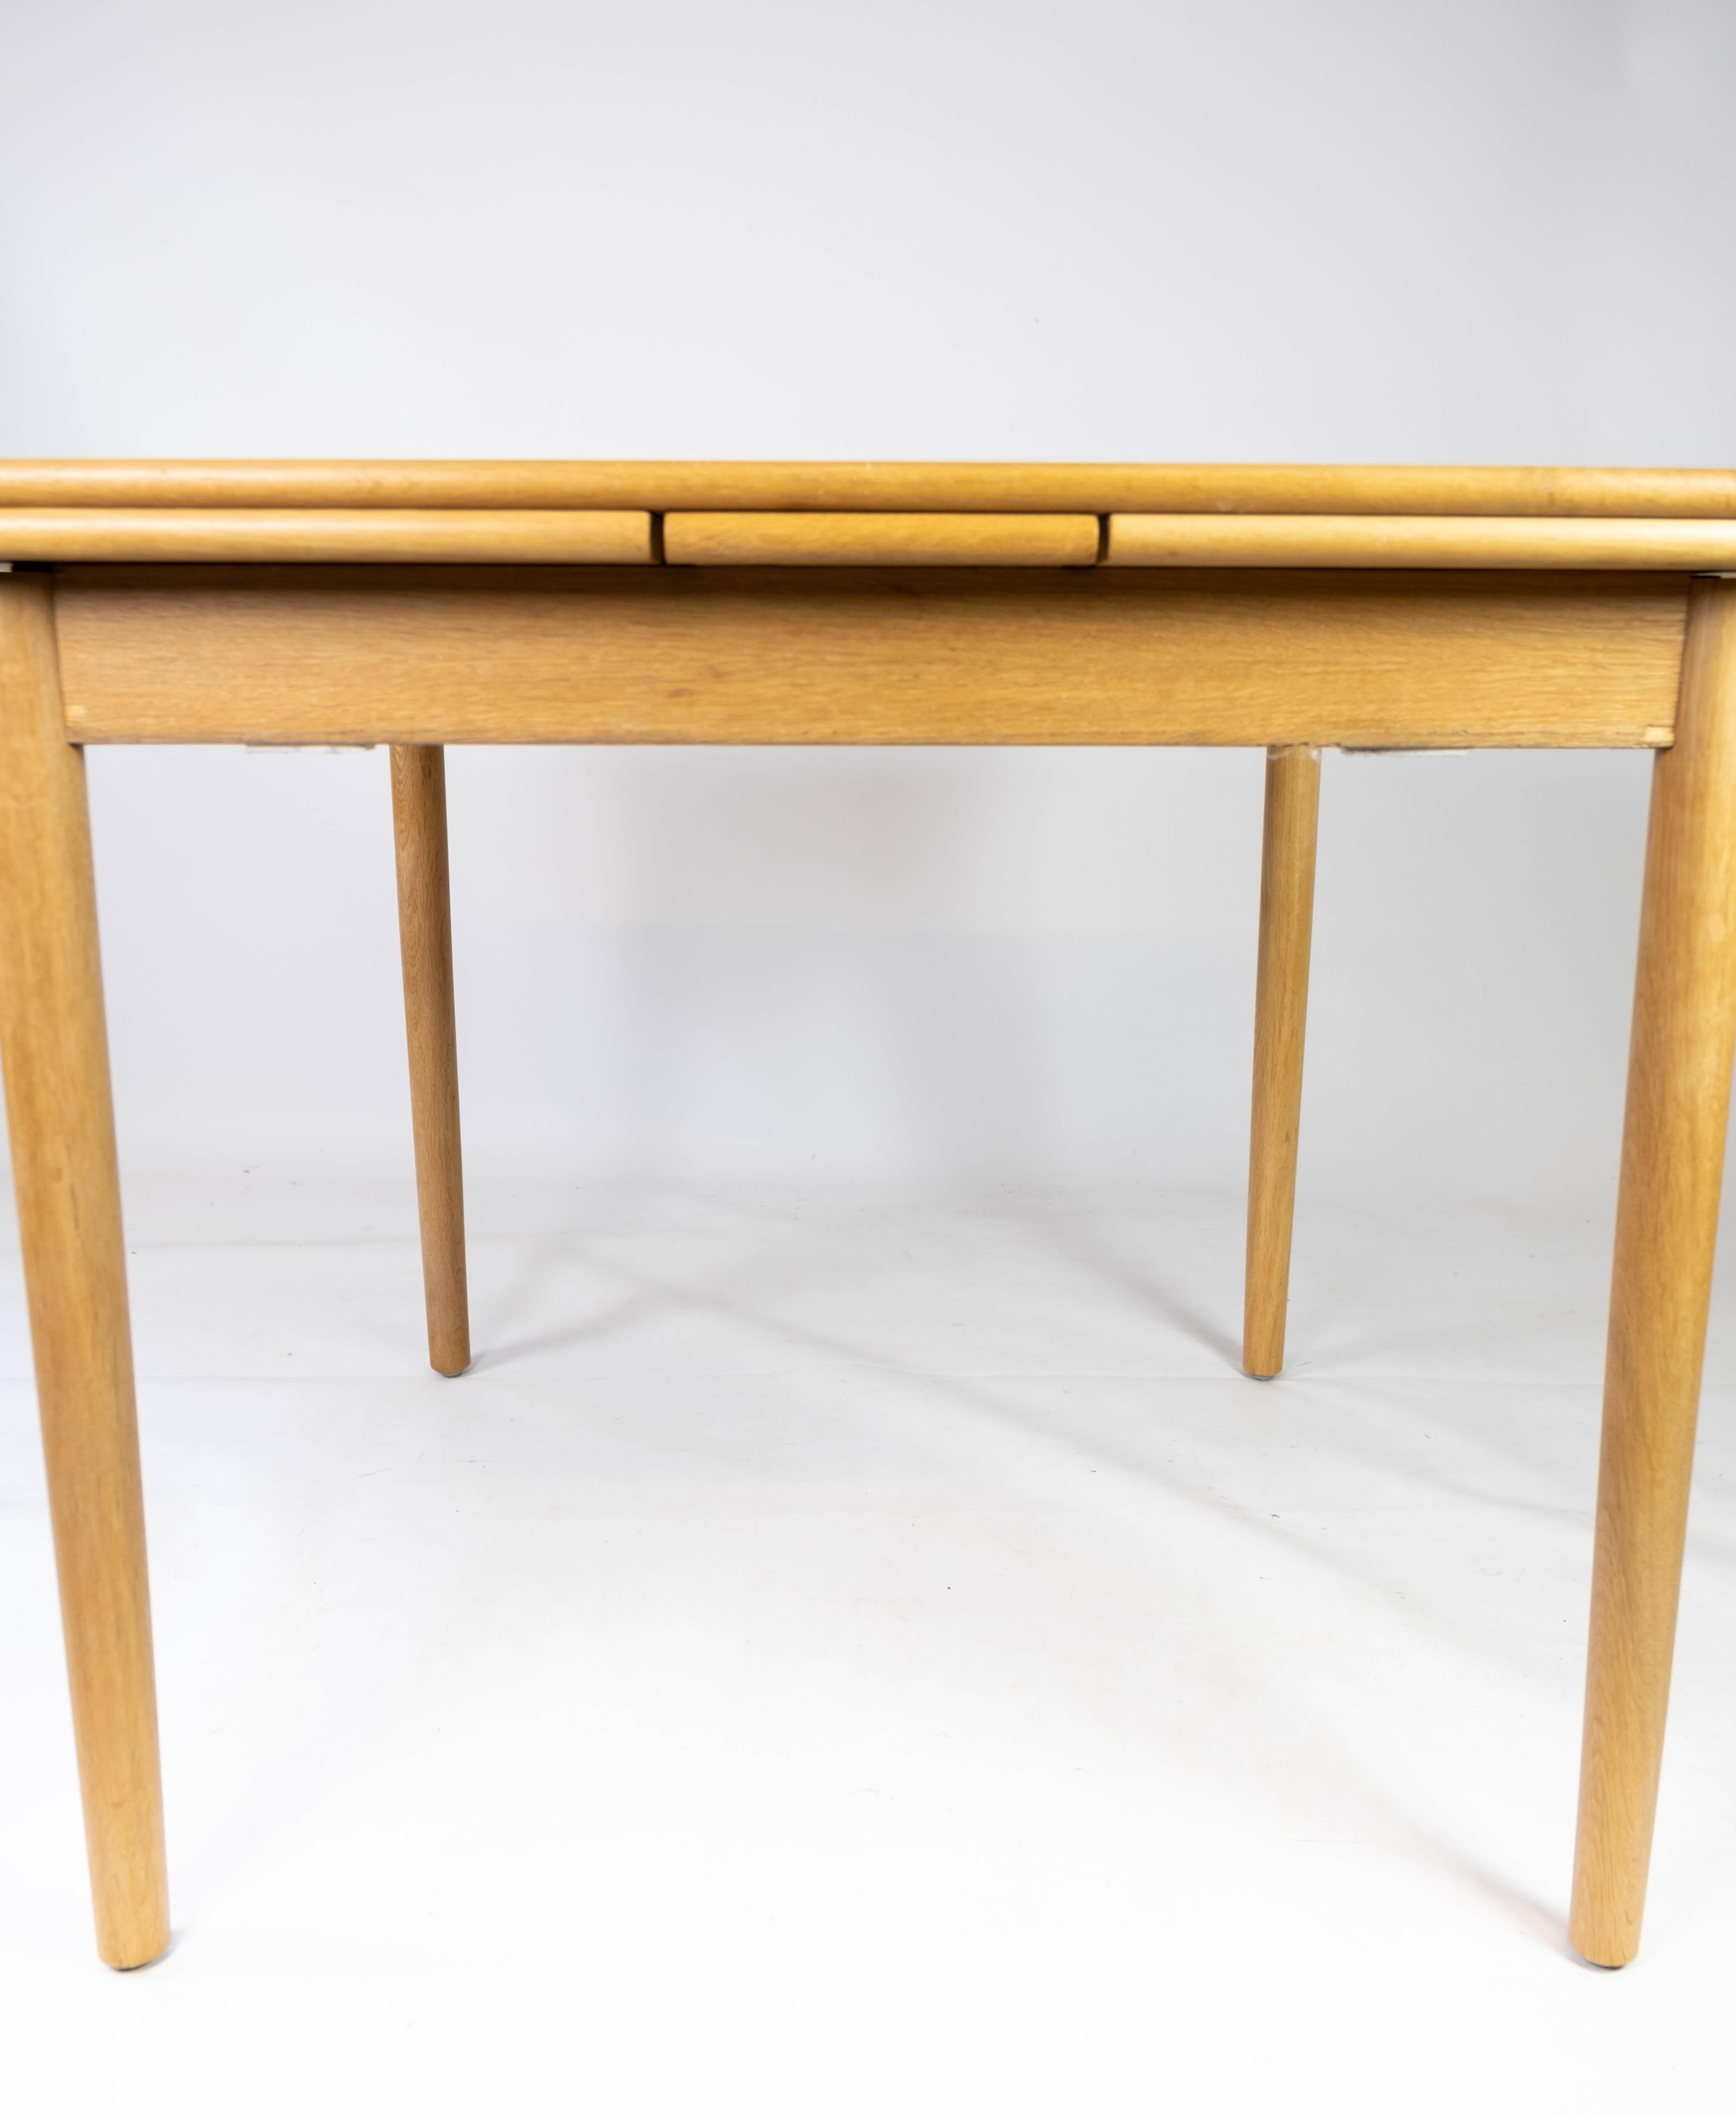 Dining Table Made In Oak With Extensions, Danish Design From 1960s In Good Condition For Sale In Lejre, DK